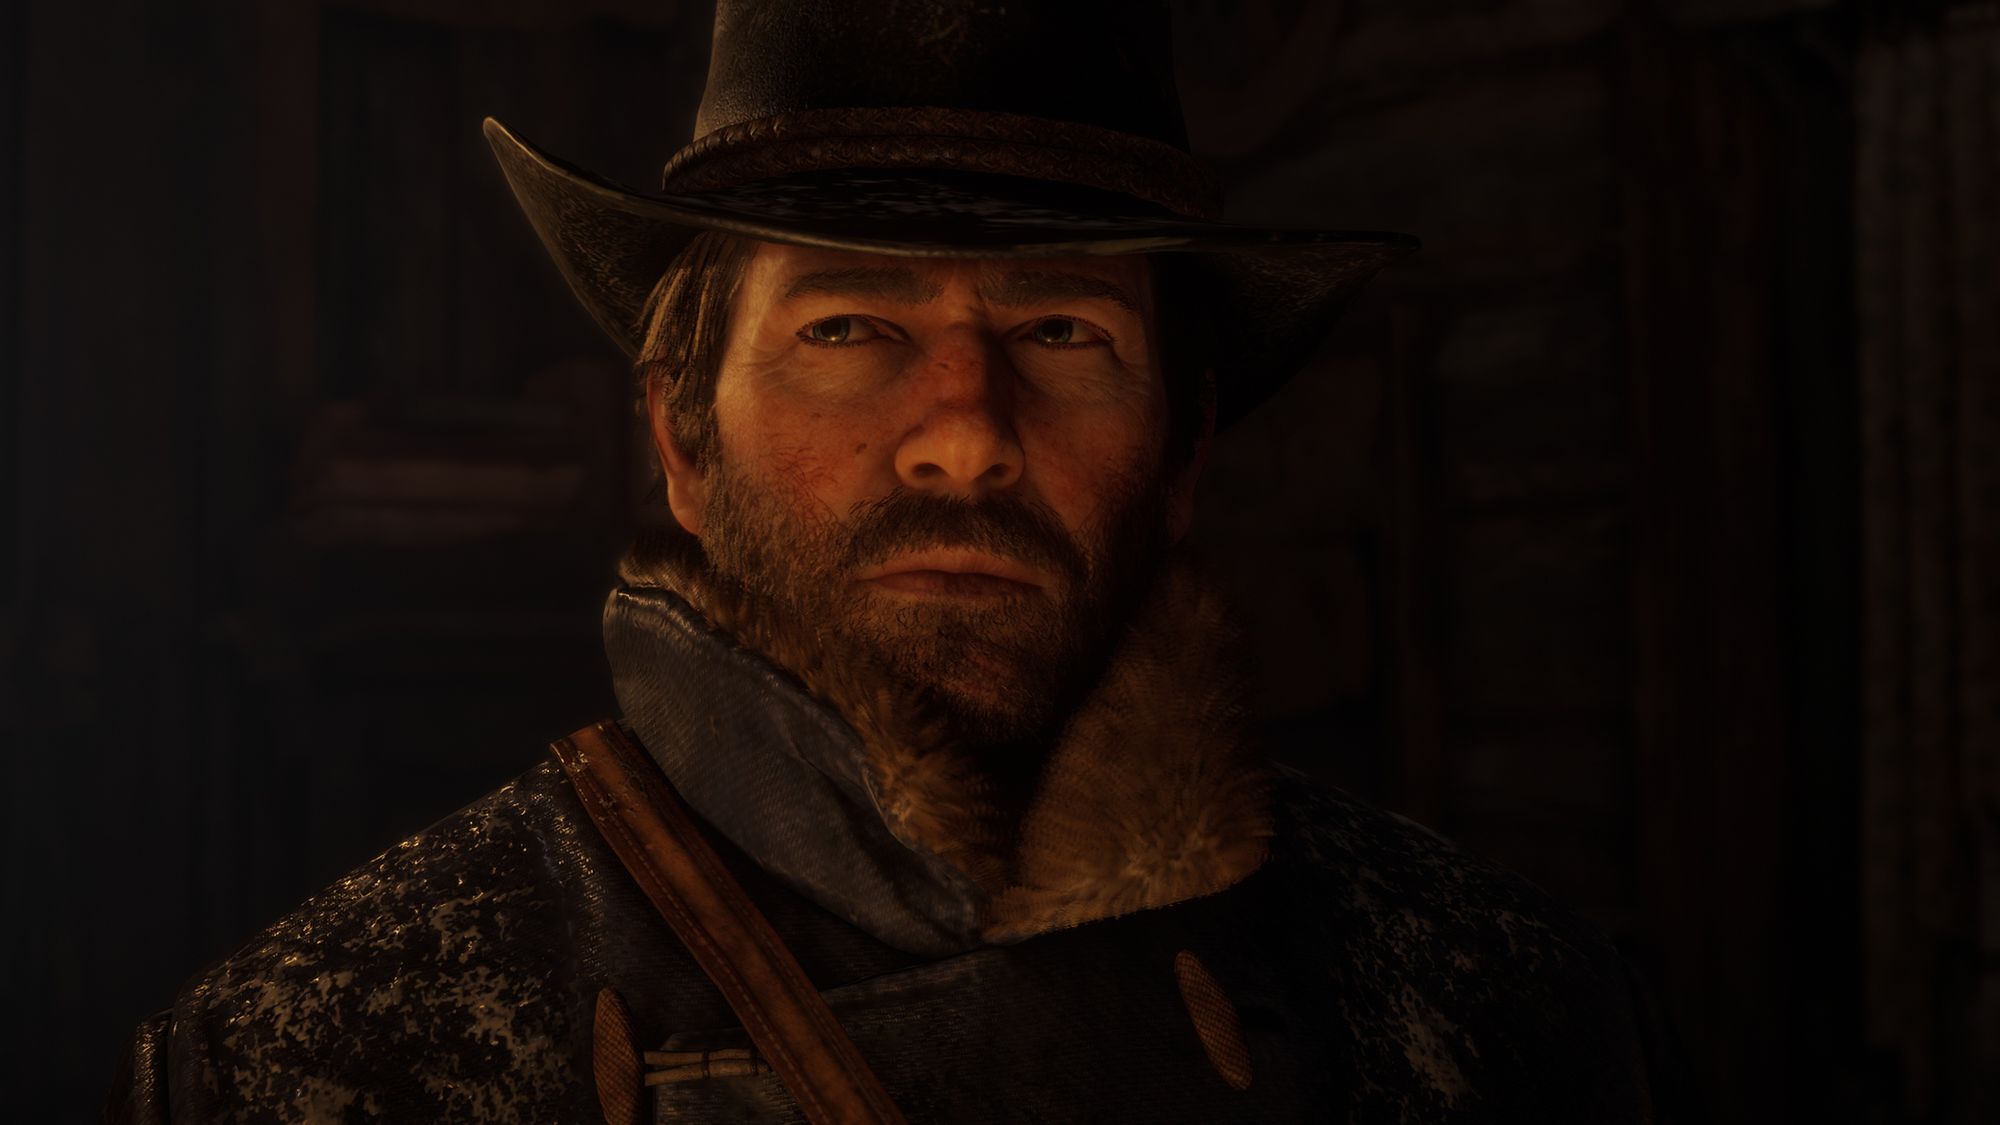 It's Time Talk About Red Dead Redemption 2's Ending [Spoilers]